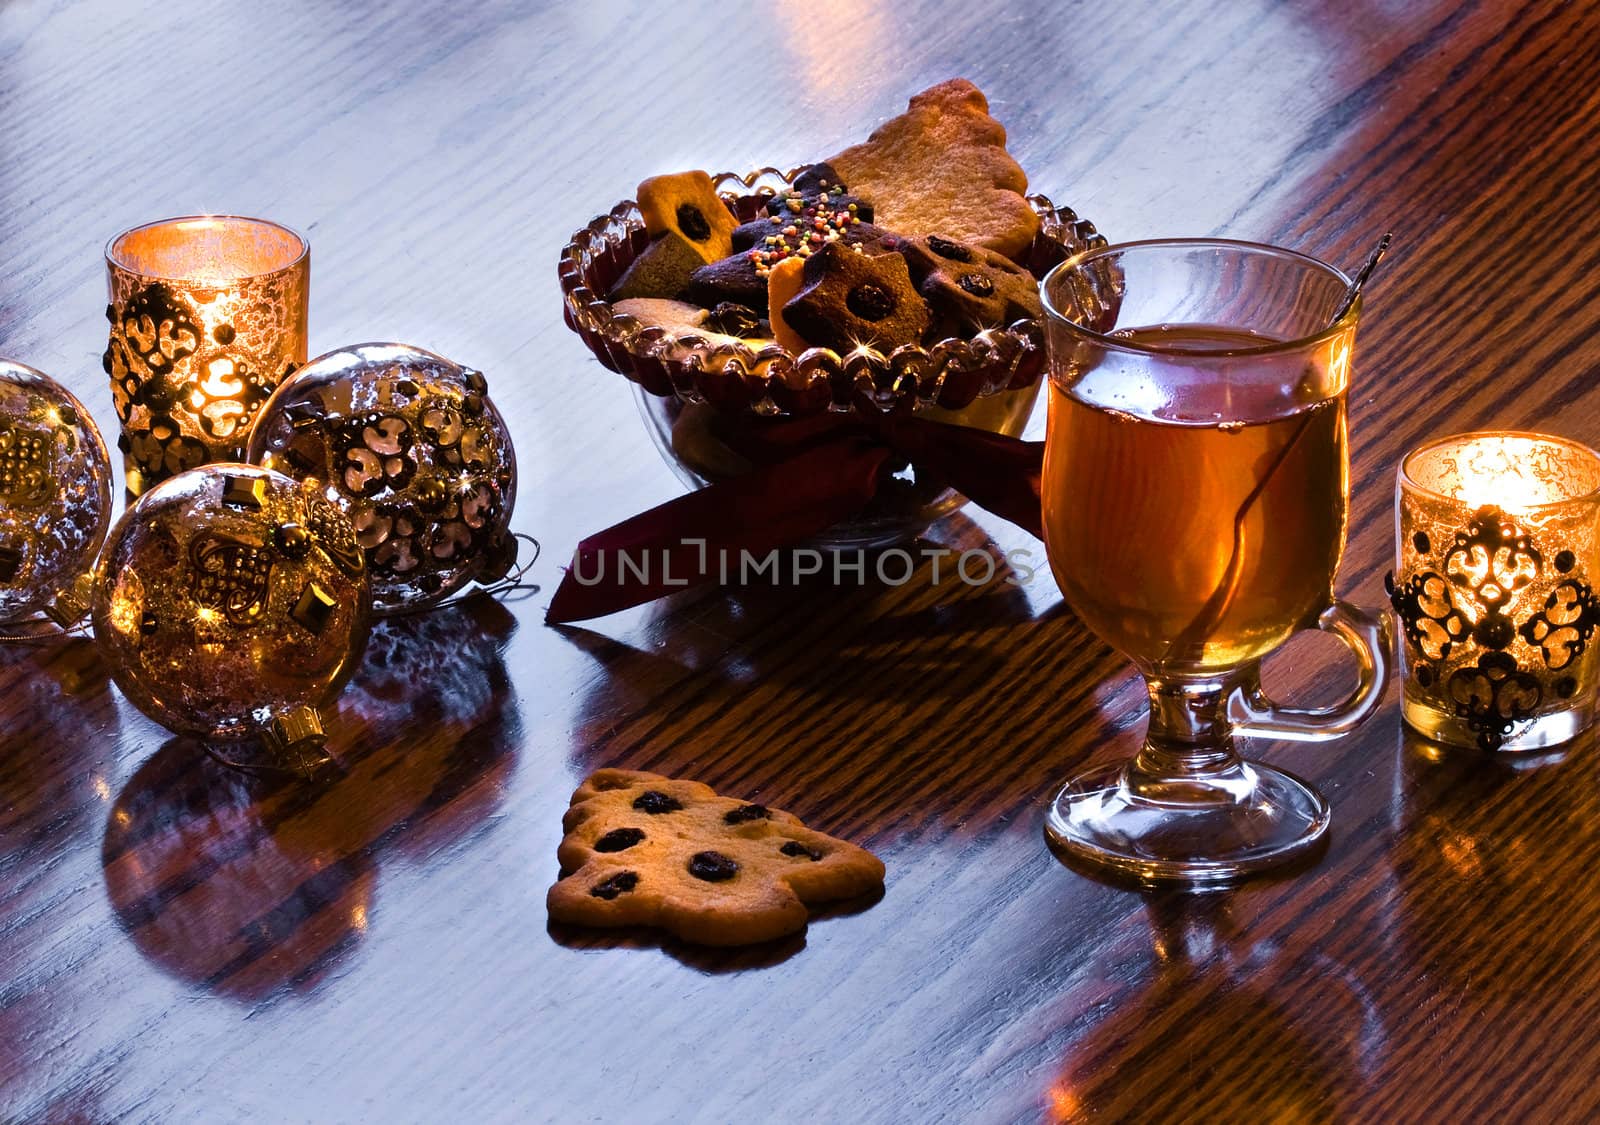 Tea time in christmastime with tea and homemade cookies